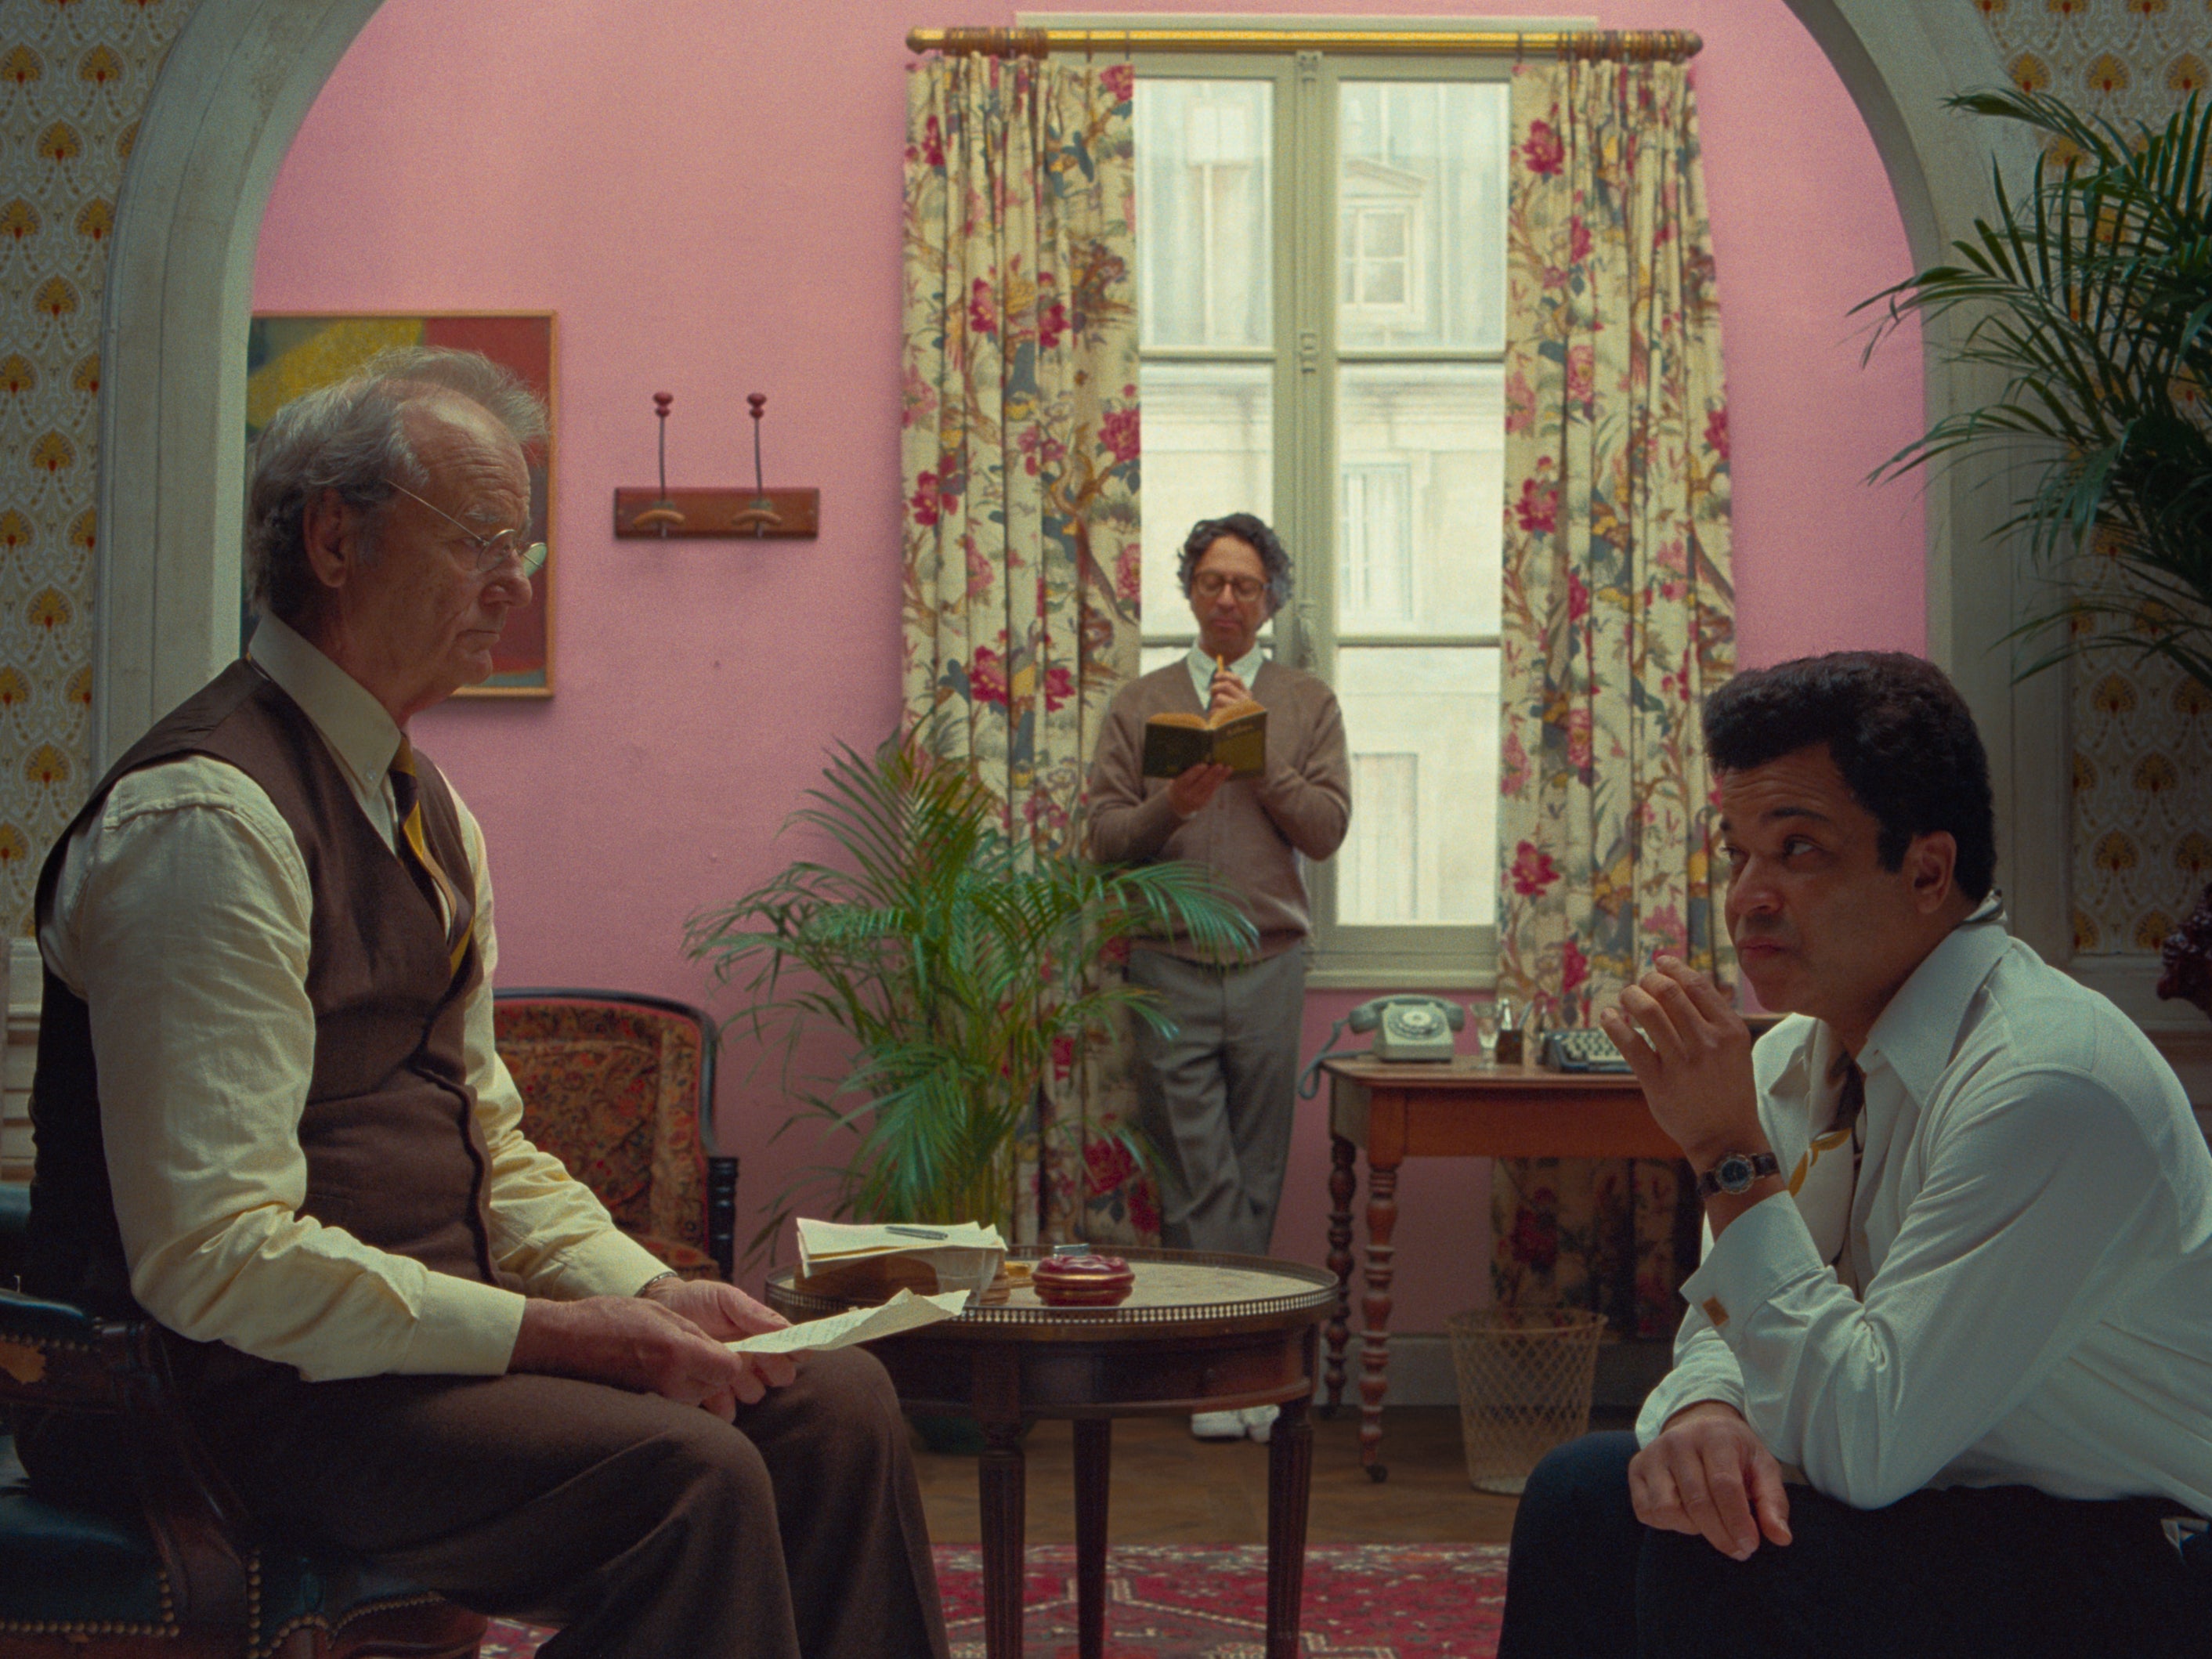 Bill Murray, Wally Wolodarsky, and Jeffrey Wright in ‘The French Dispatch’